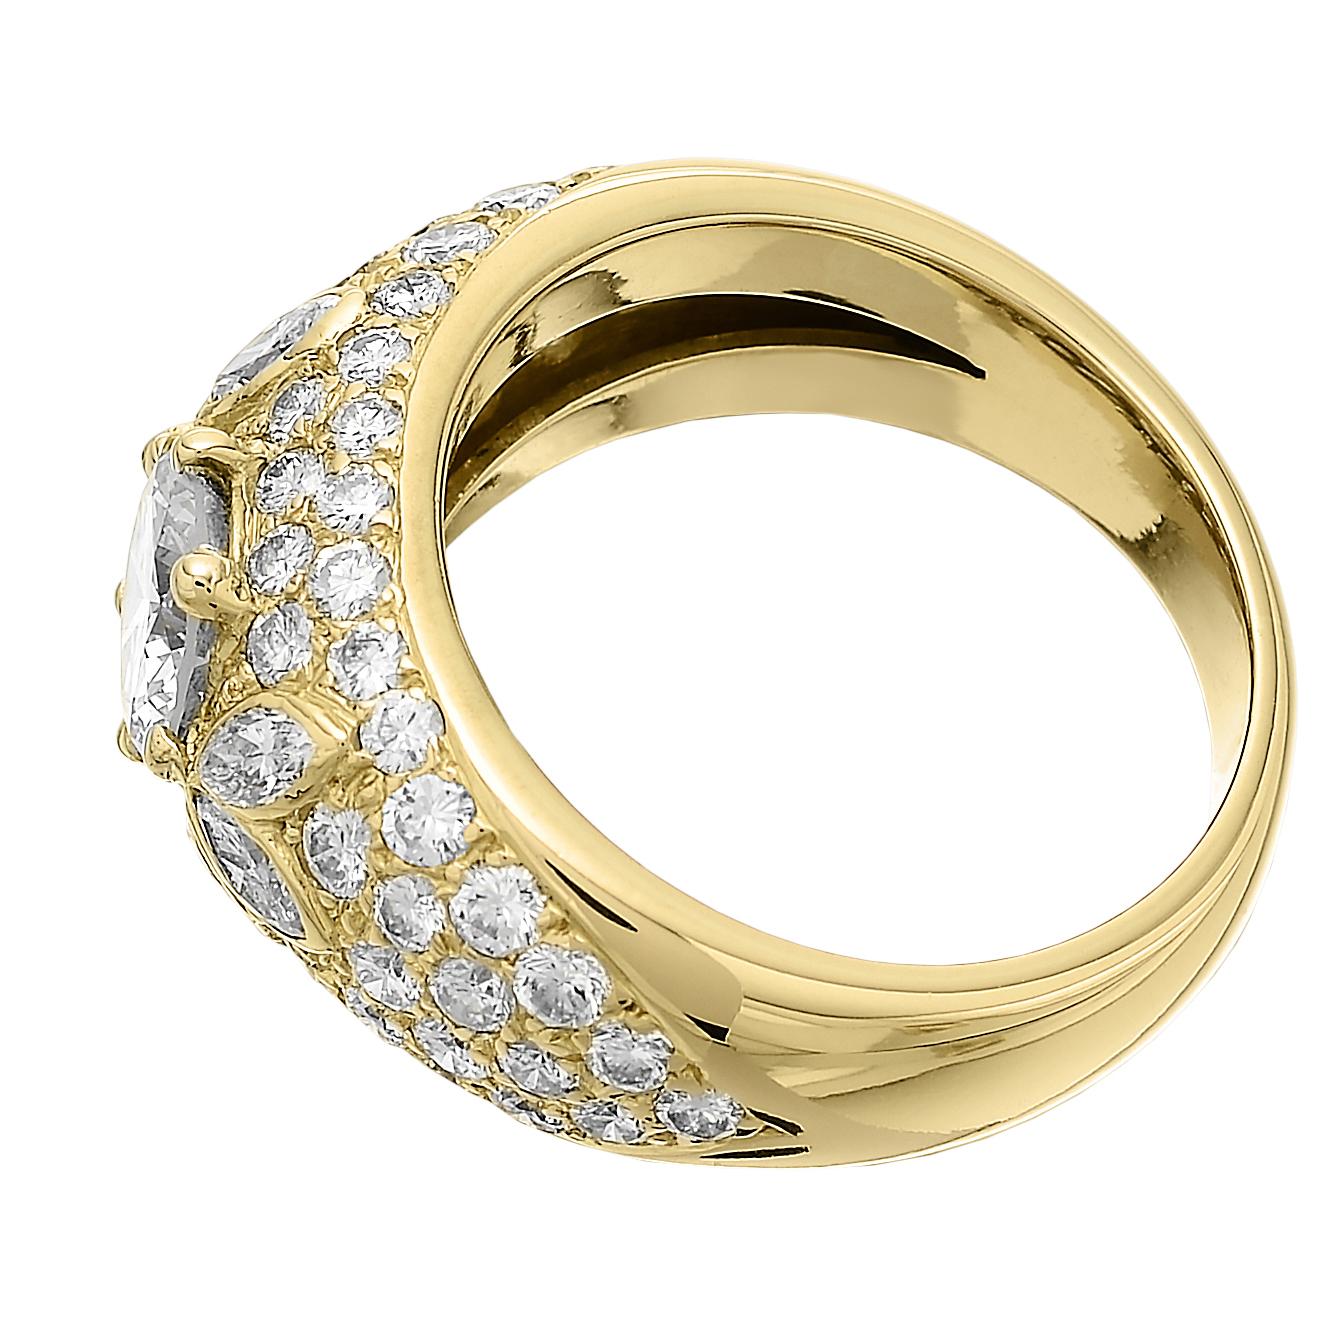 Zertifizierter Diamant  Bombay Cluster Dome 3,66ct Ring in dickem 18ct Gelbgold  4